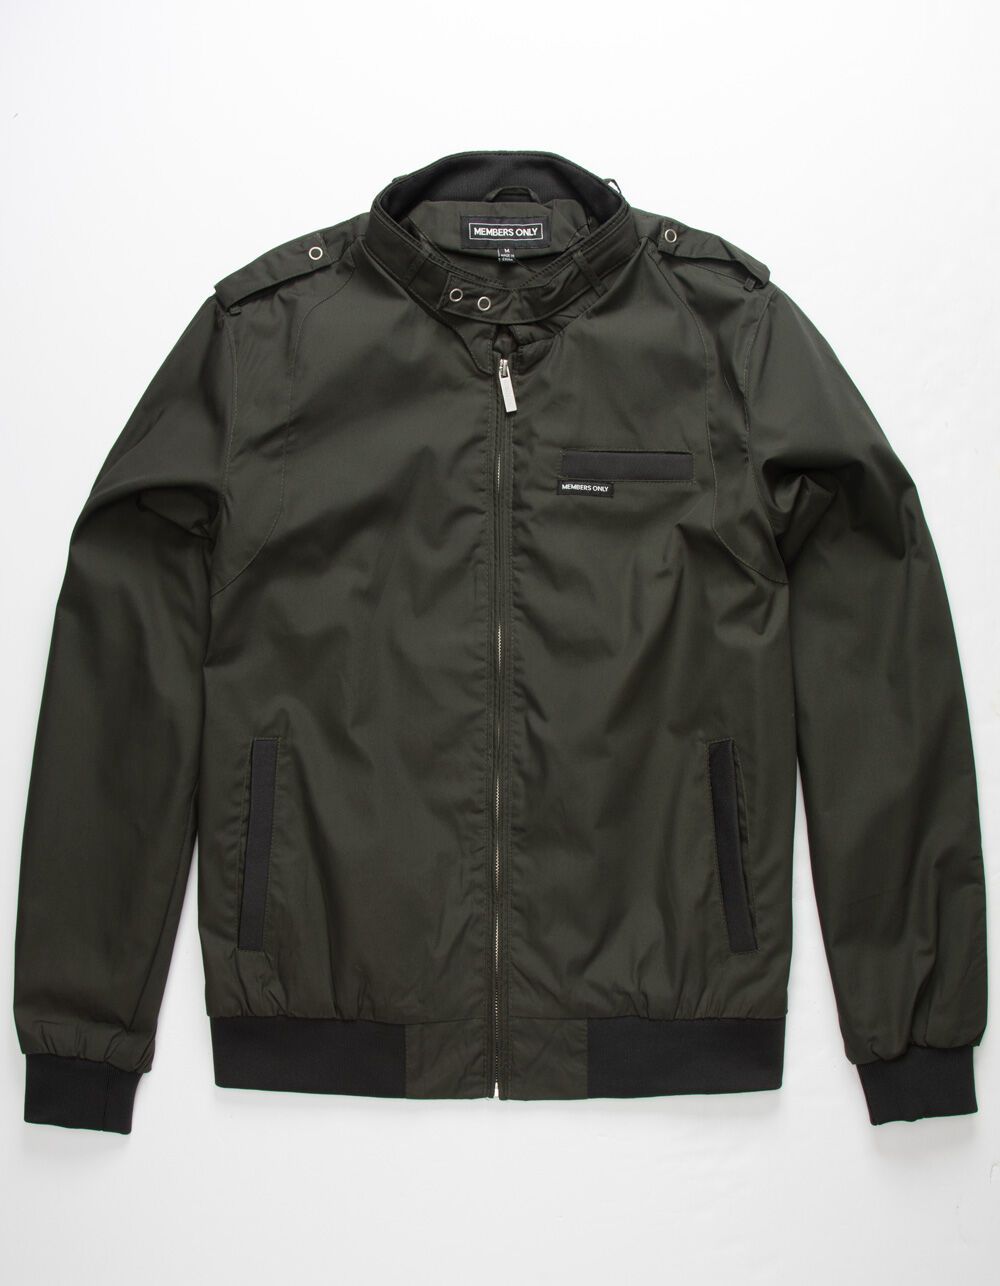 MEMBERS ONLY Iconic Racer Dark Green Jacket | Tillys